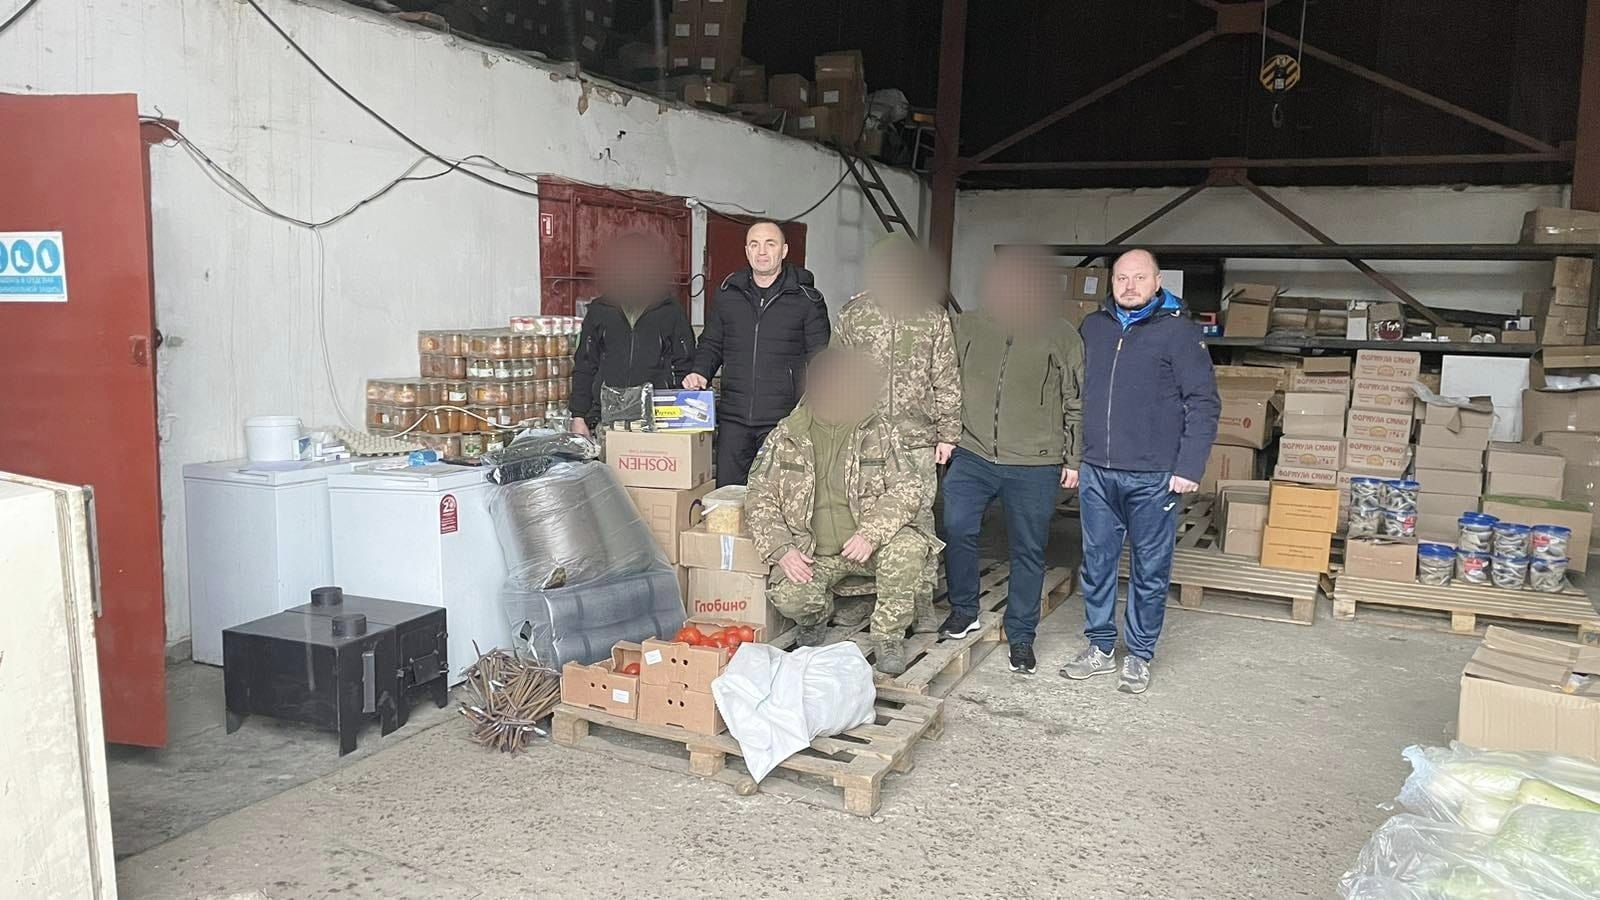 Aid to soldiers of the Ukrainian Armed Forces in the area of Bakhmut and Soledar